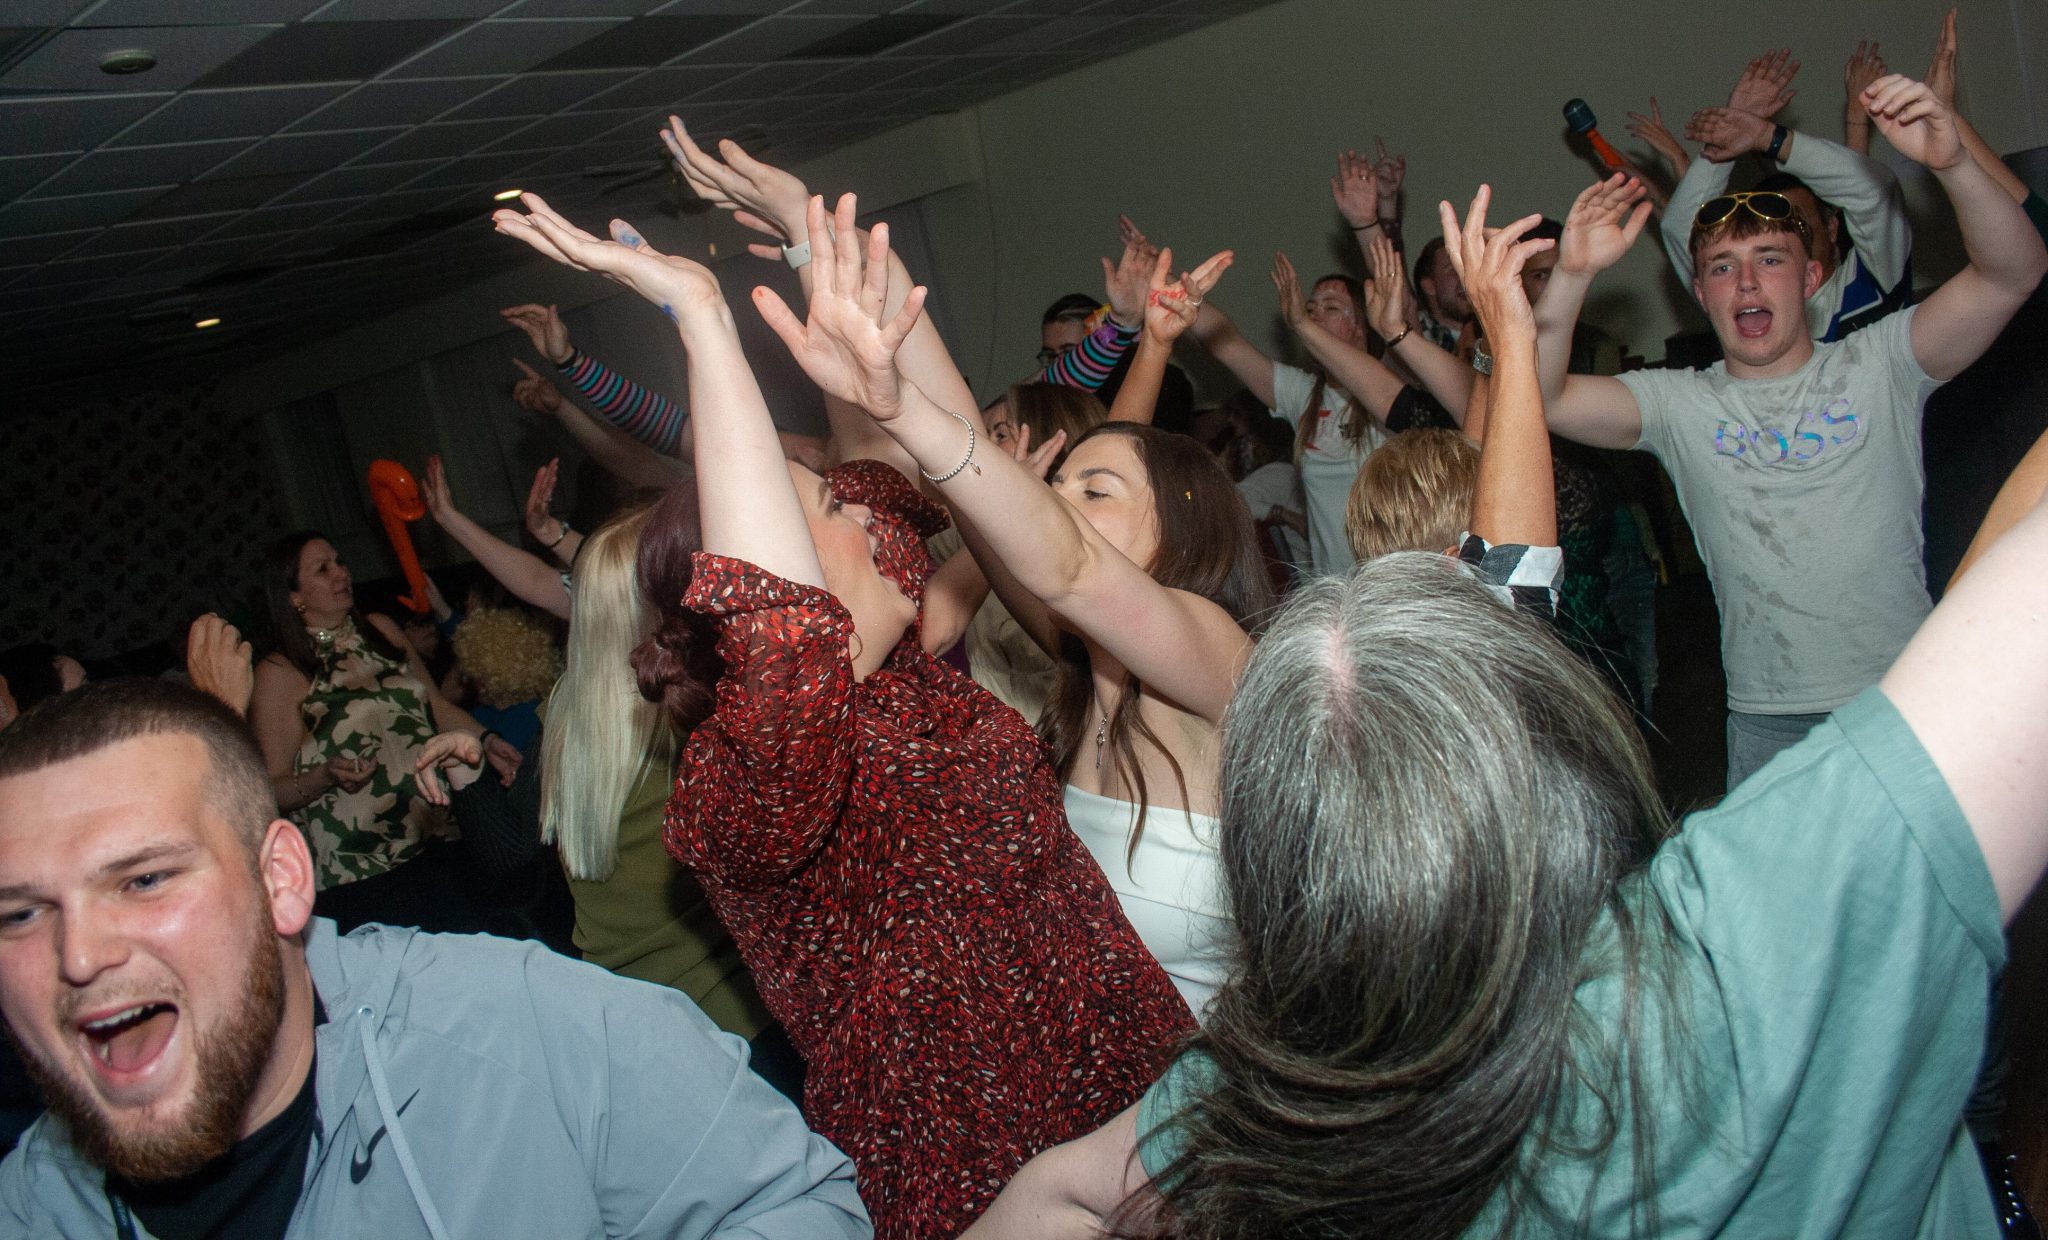 Guests filled the dance floor